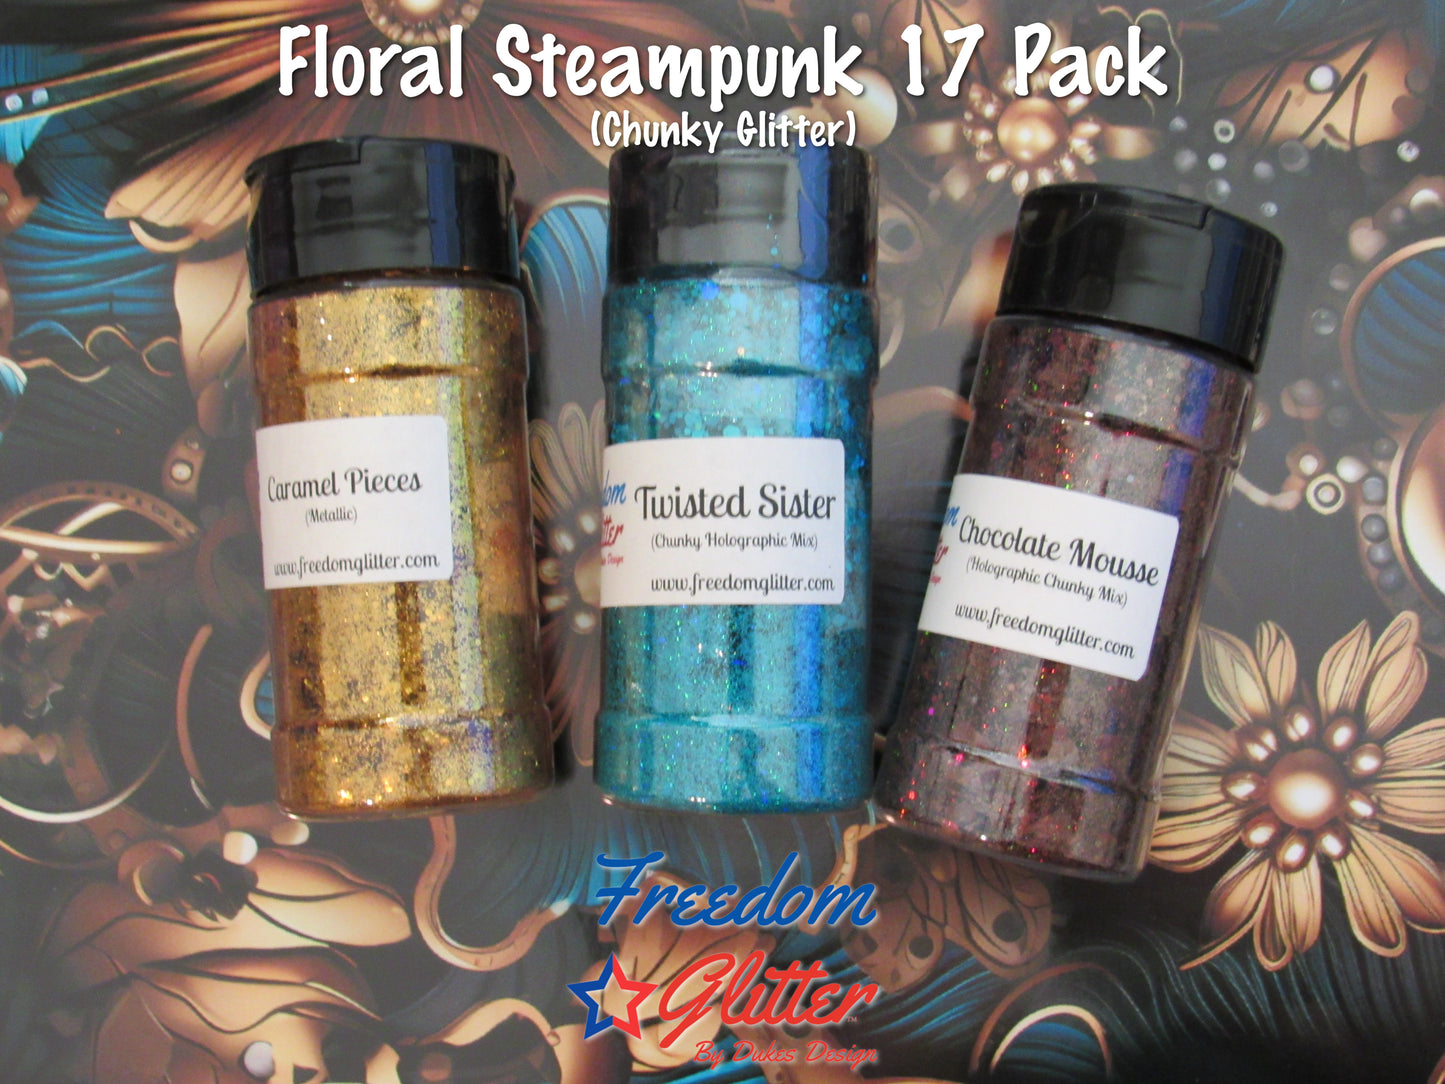 Floral Steampunk 17 Pack (Chunky Glitter)